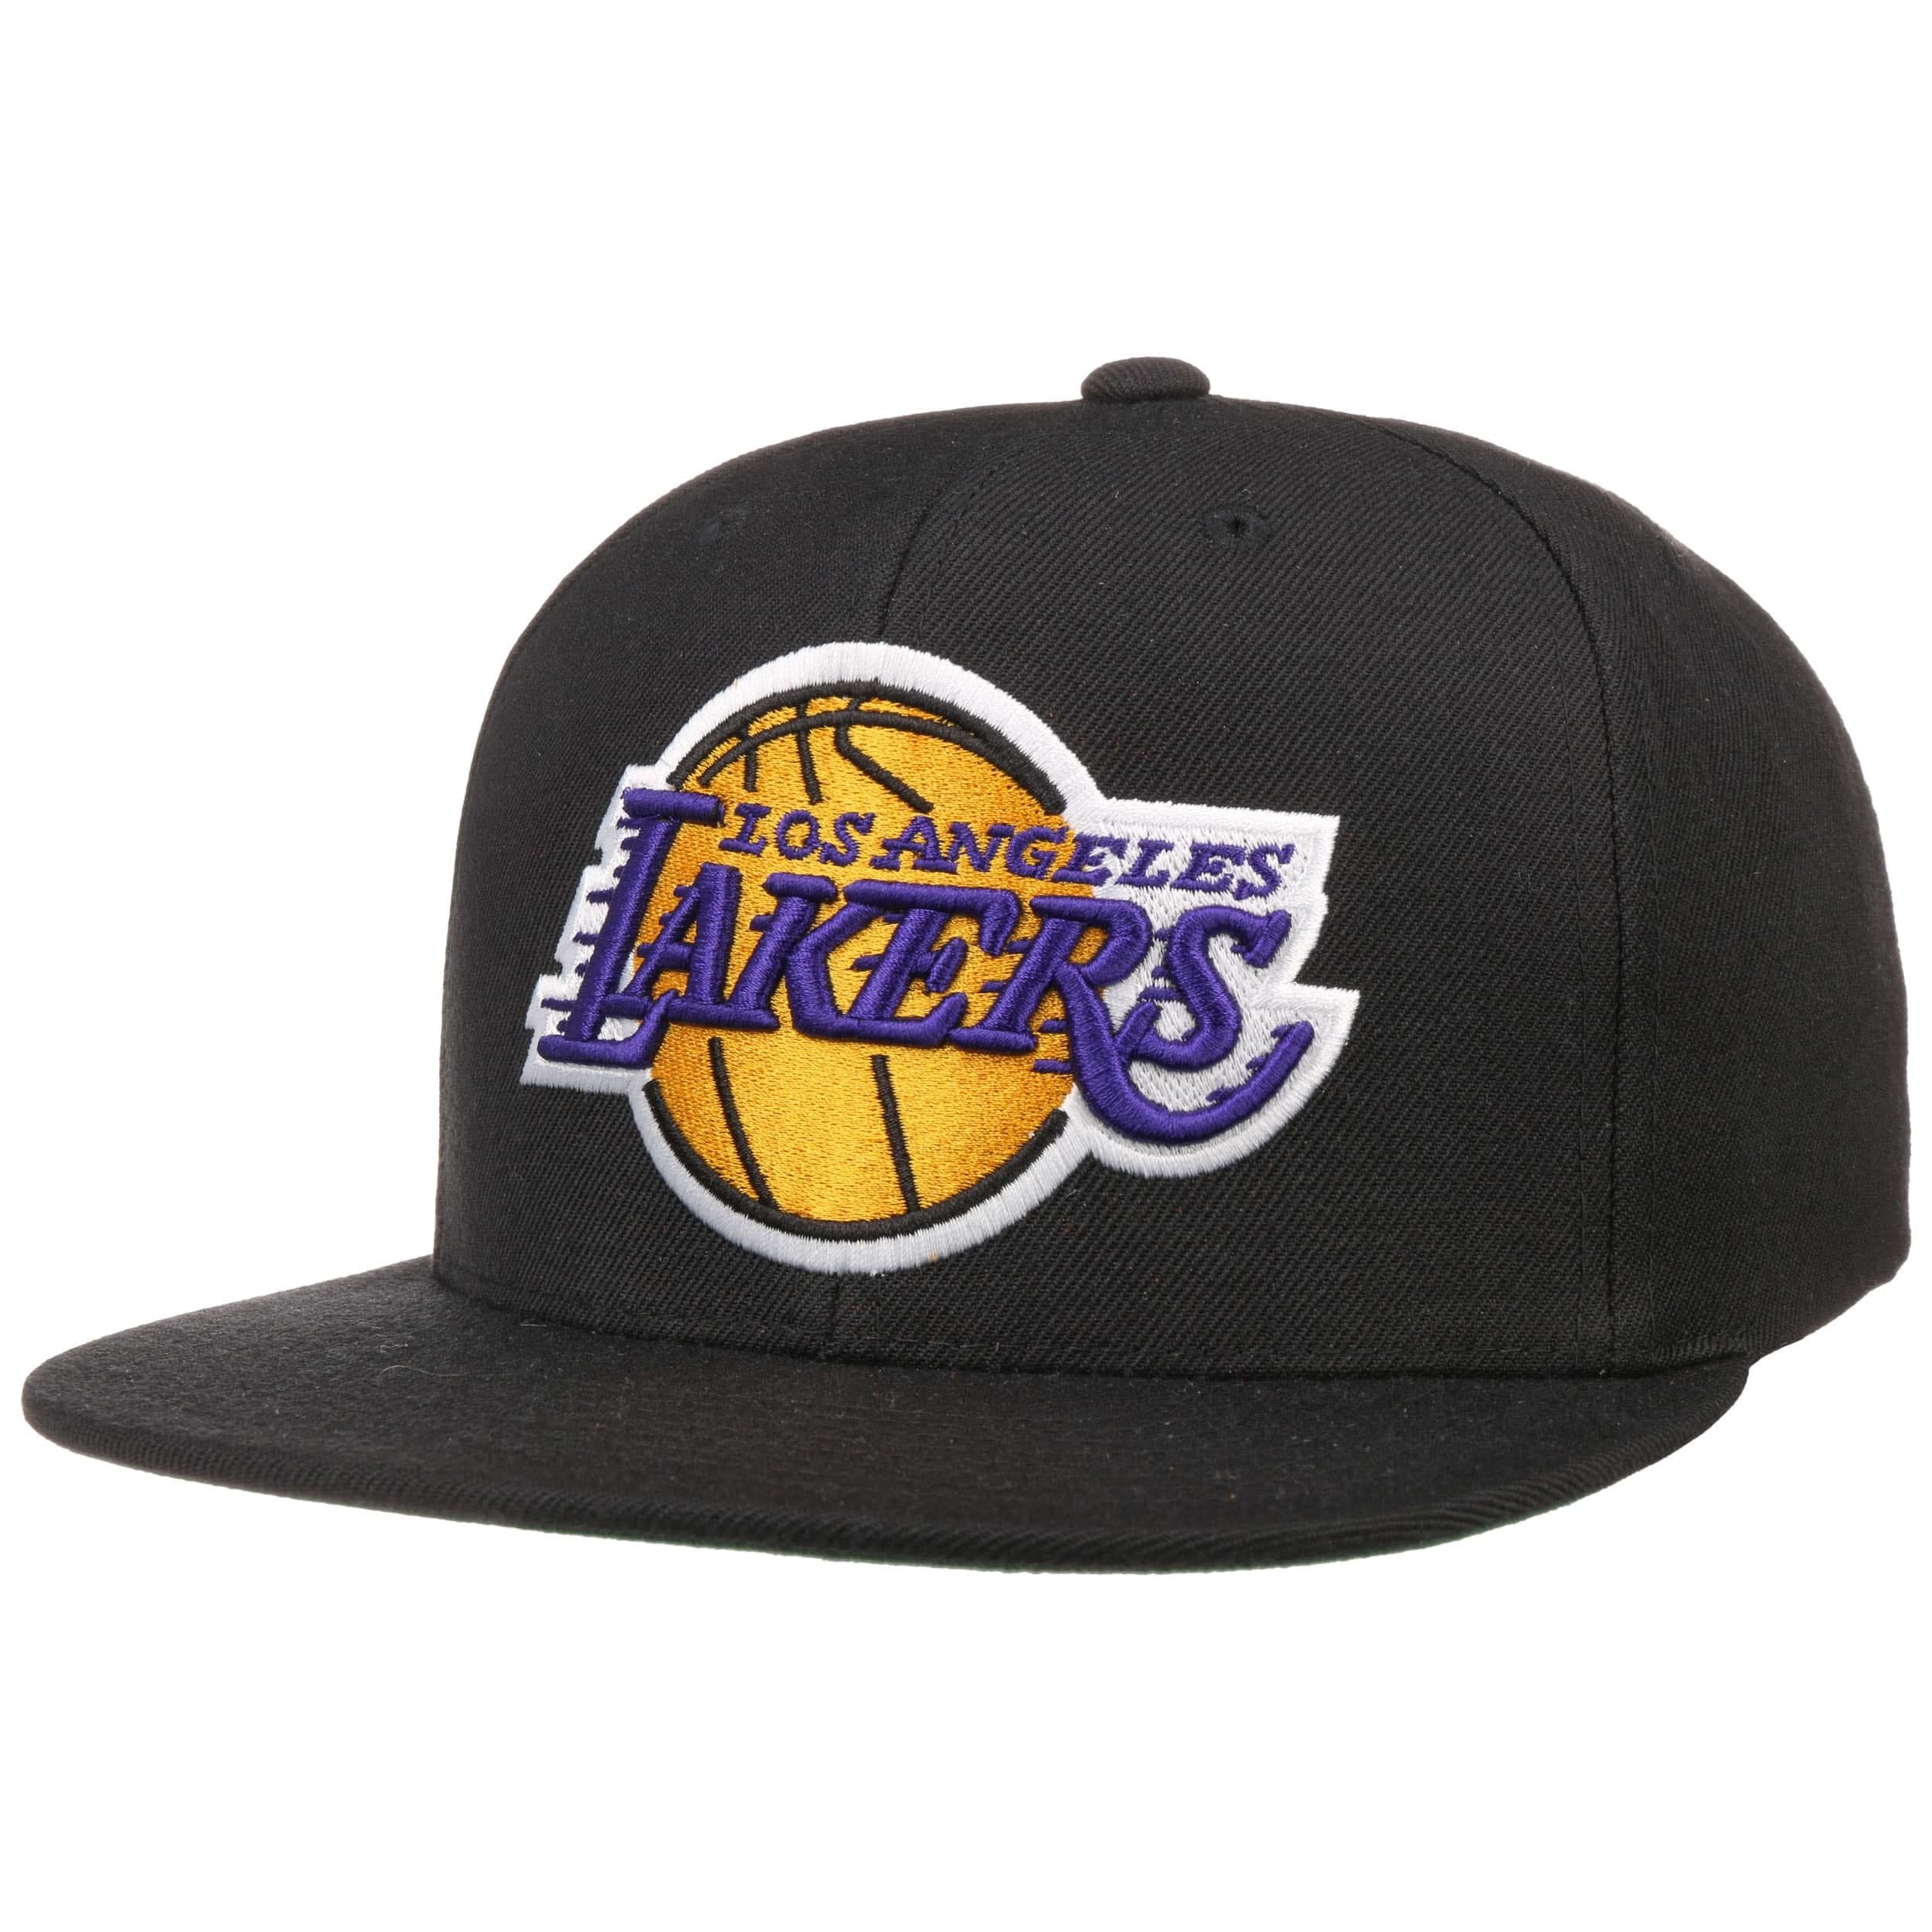 Mitchell & Ness Los Angeles Lakers Wool Solid Snapback Cap